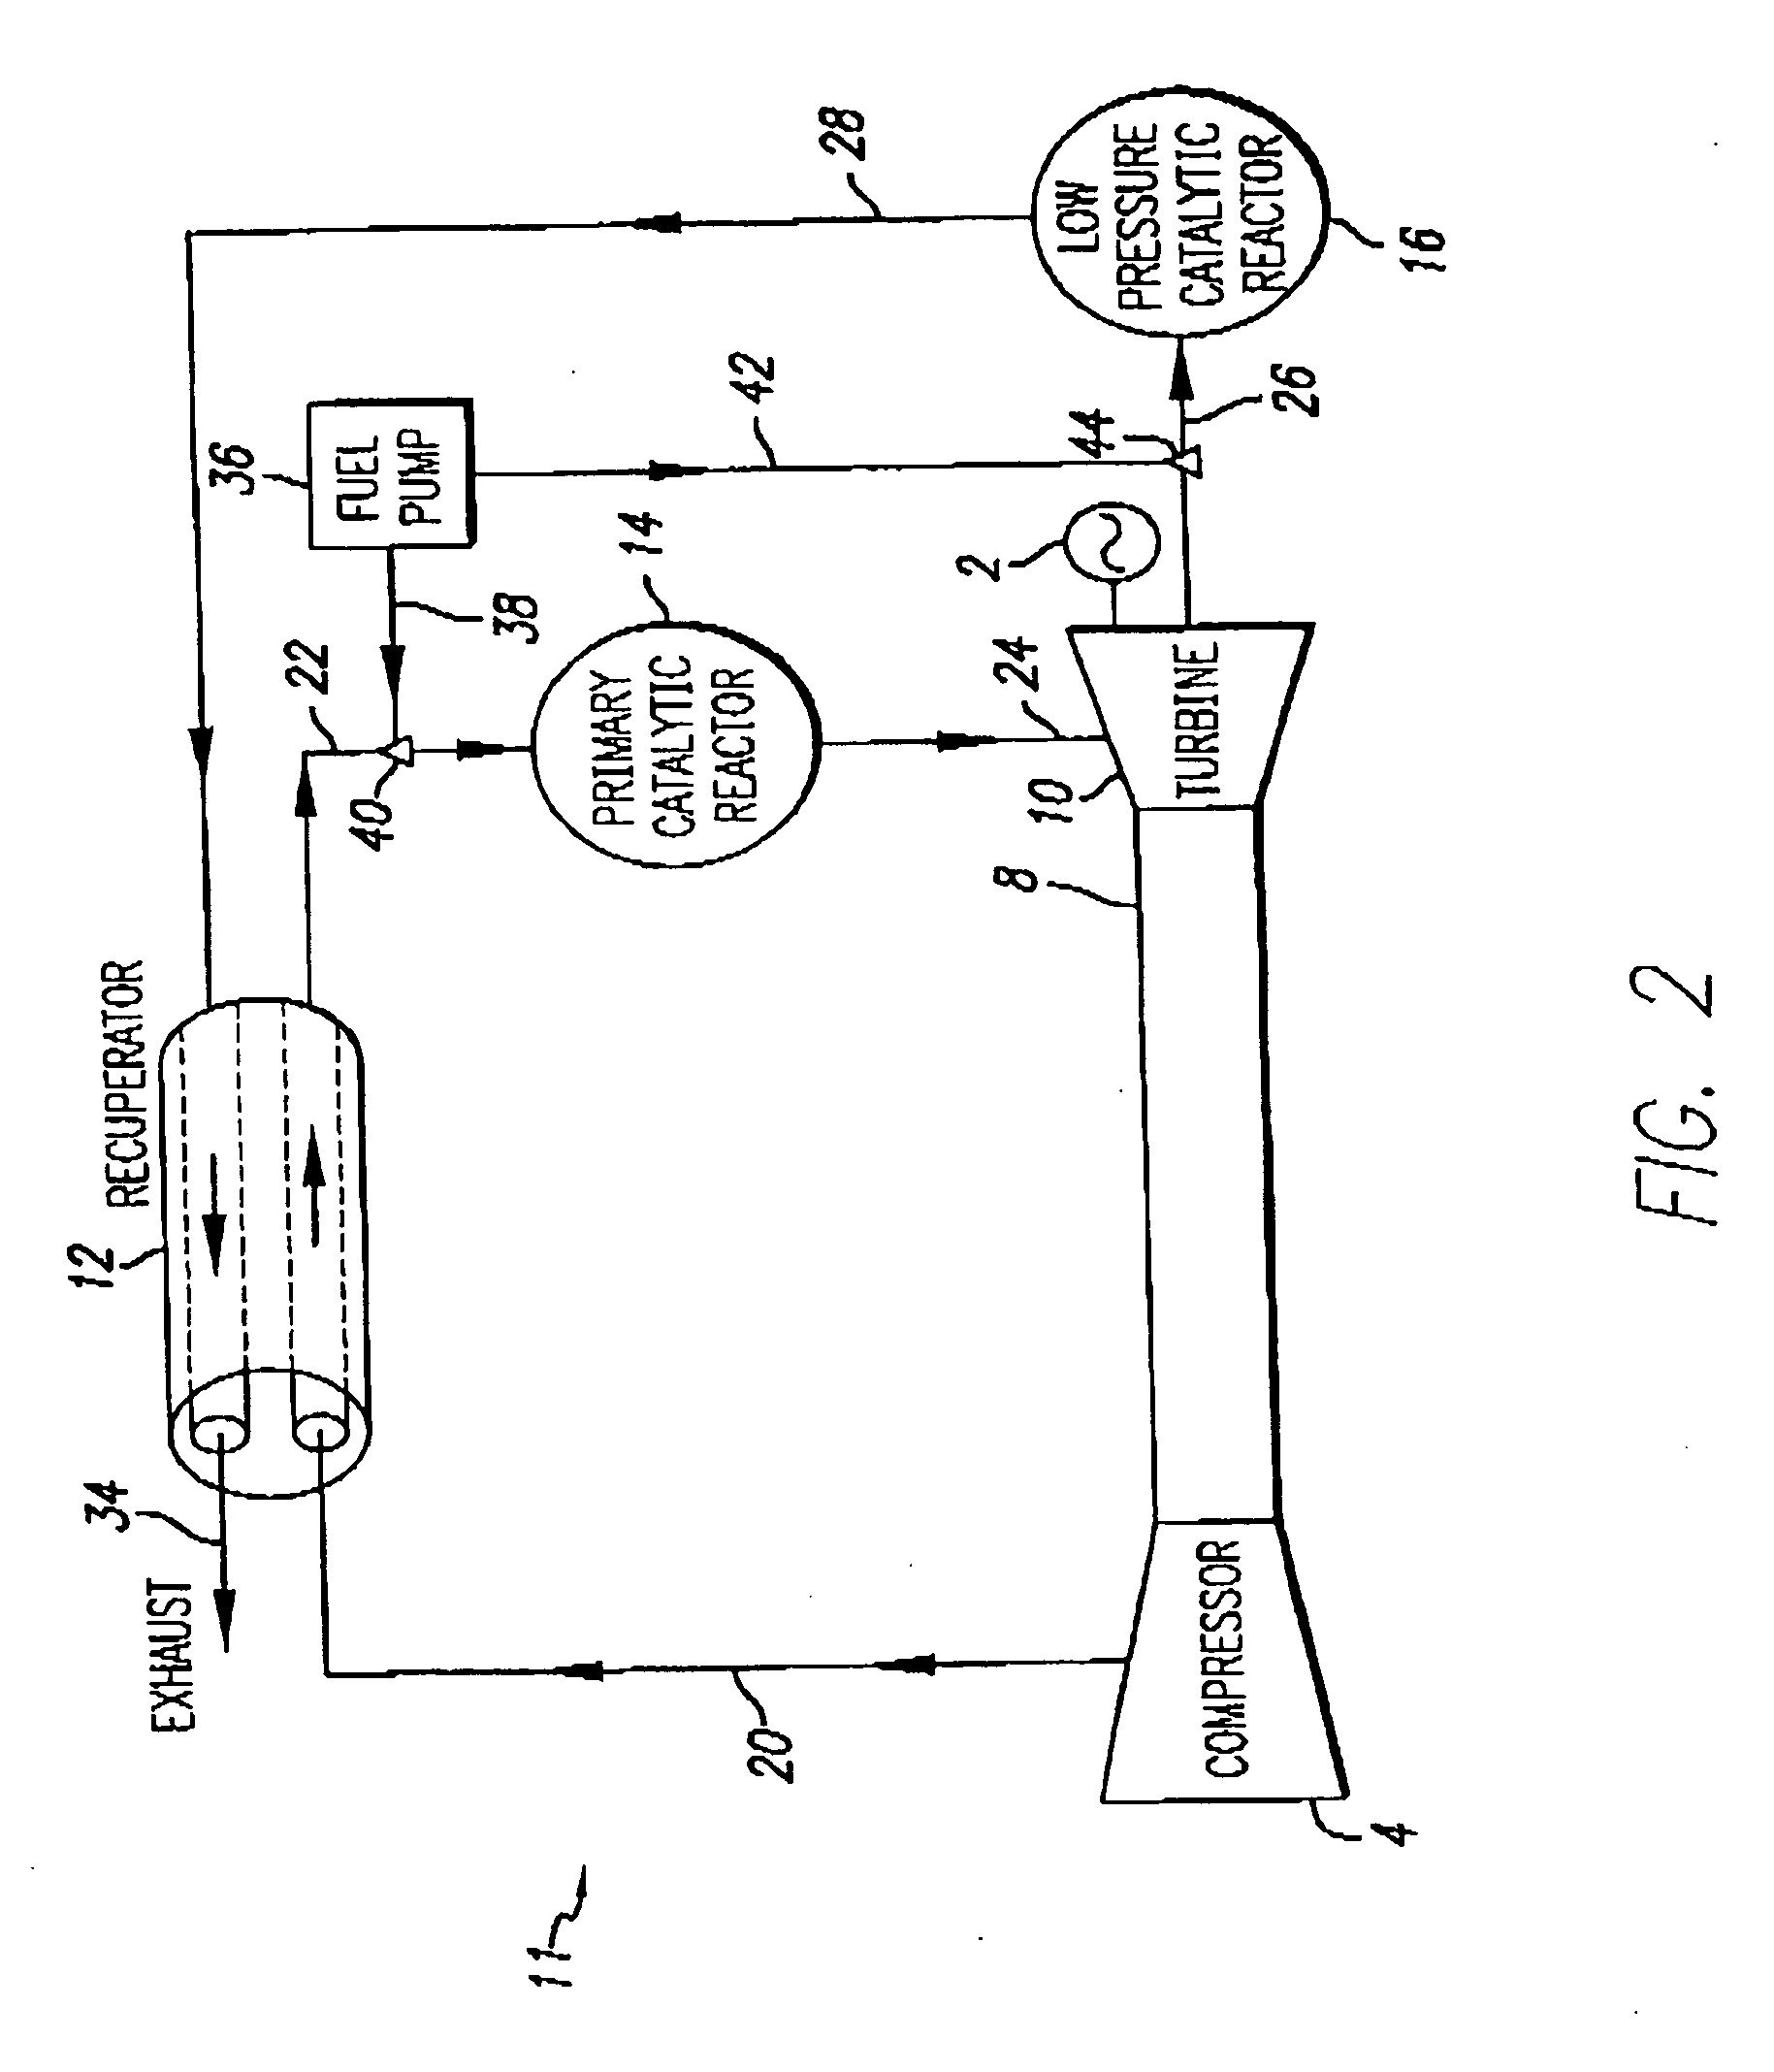 Integrated turbine power generation system with catalytic reactor